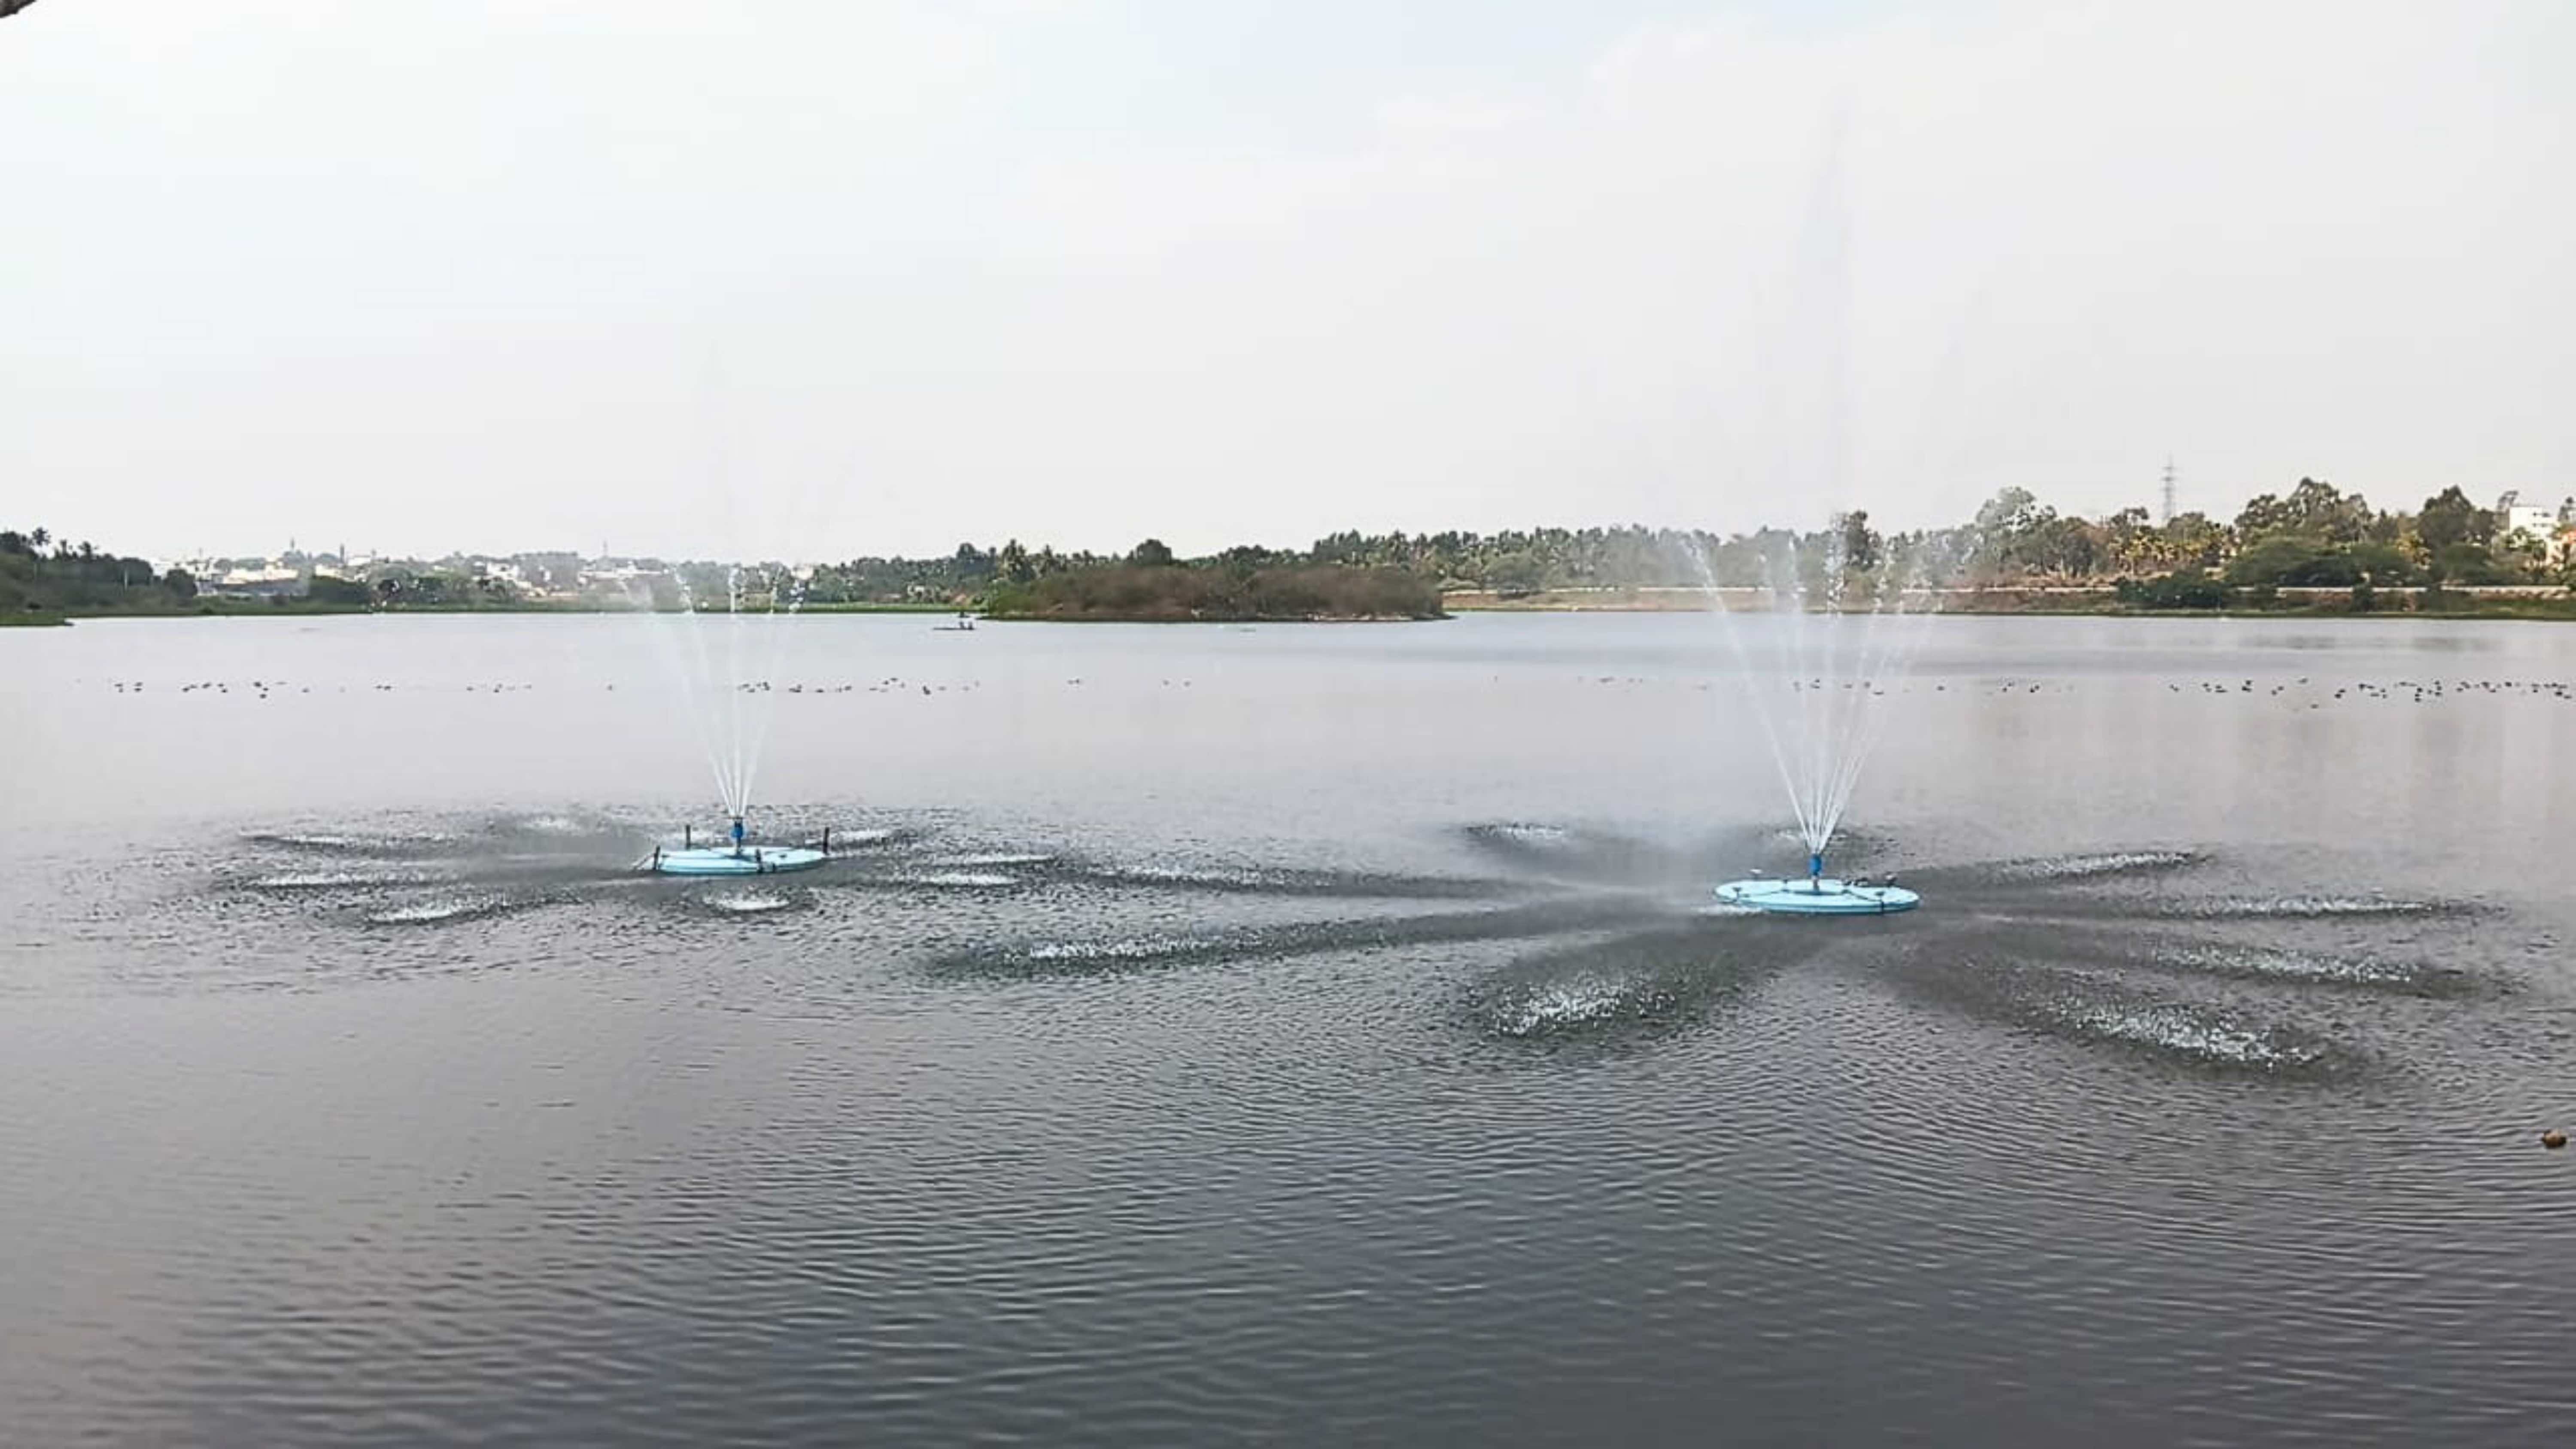 Solar-powered floating fountains installed at Nagarakere to aerate water, provide oxygen to aquatic life, prevent excessive bacteria growth, and contribute to a healthy wetland ecosystem.